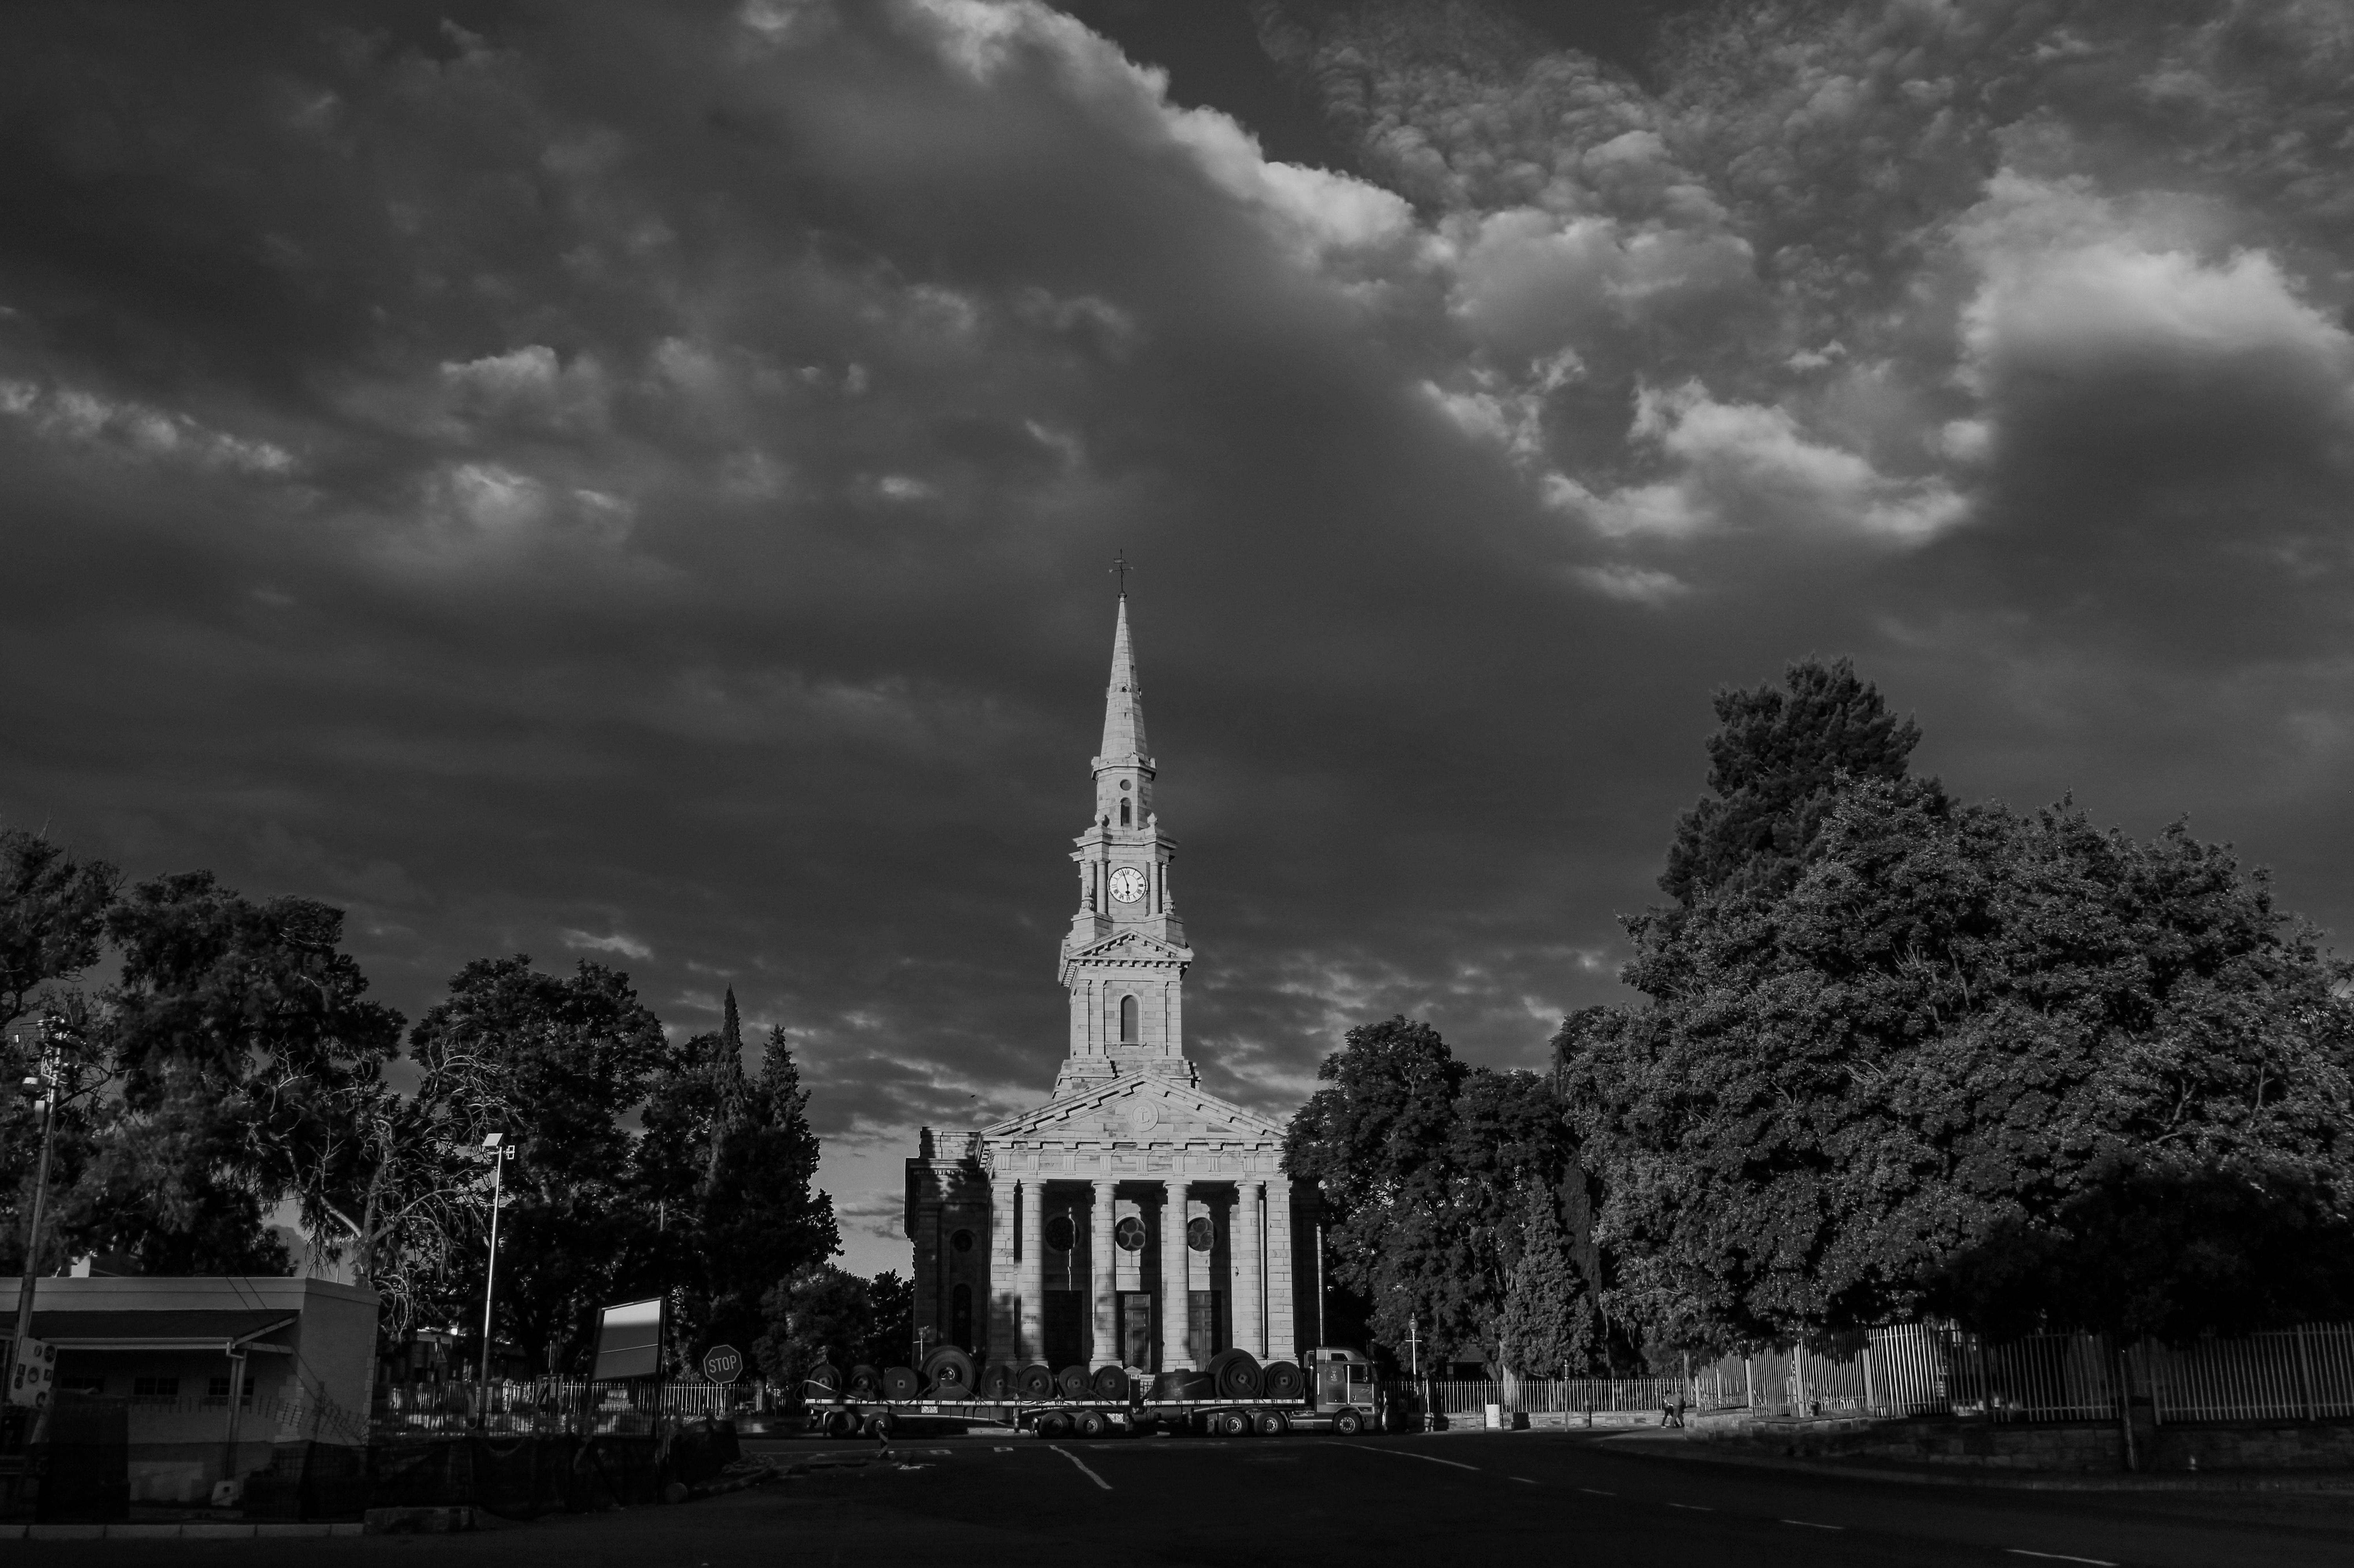 The Cradock Moederkerk – if you’ve been to Trafalgar Square, London, you’ll recognise the architecture.